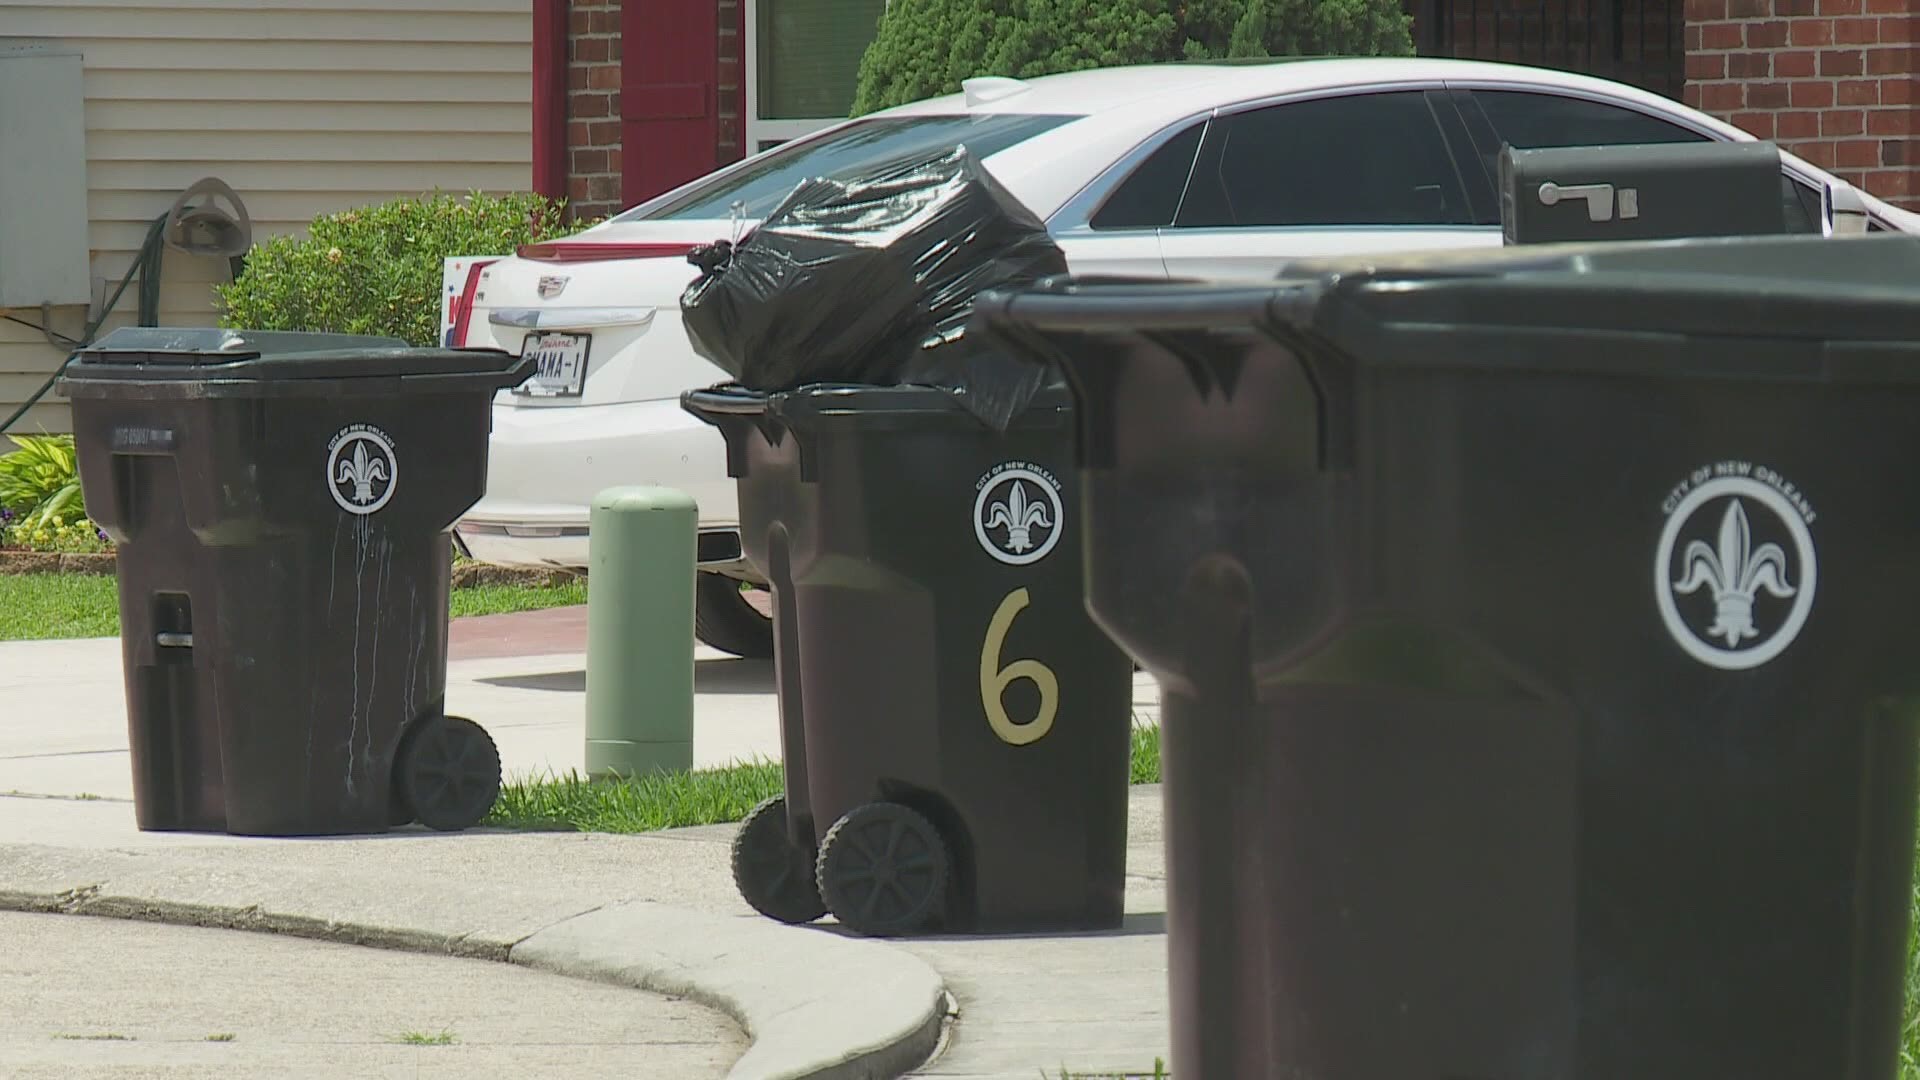 The New Orleans City Council will host a meeting to discuss the delay and set back of trash pick up in the metro area.